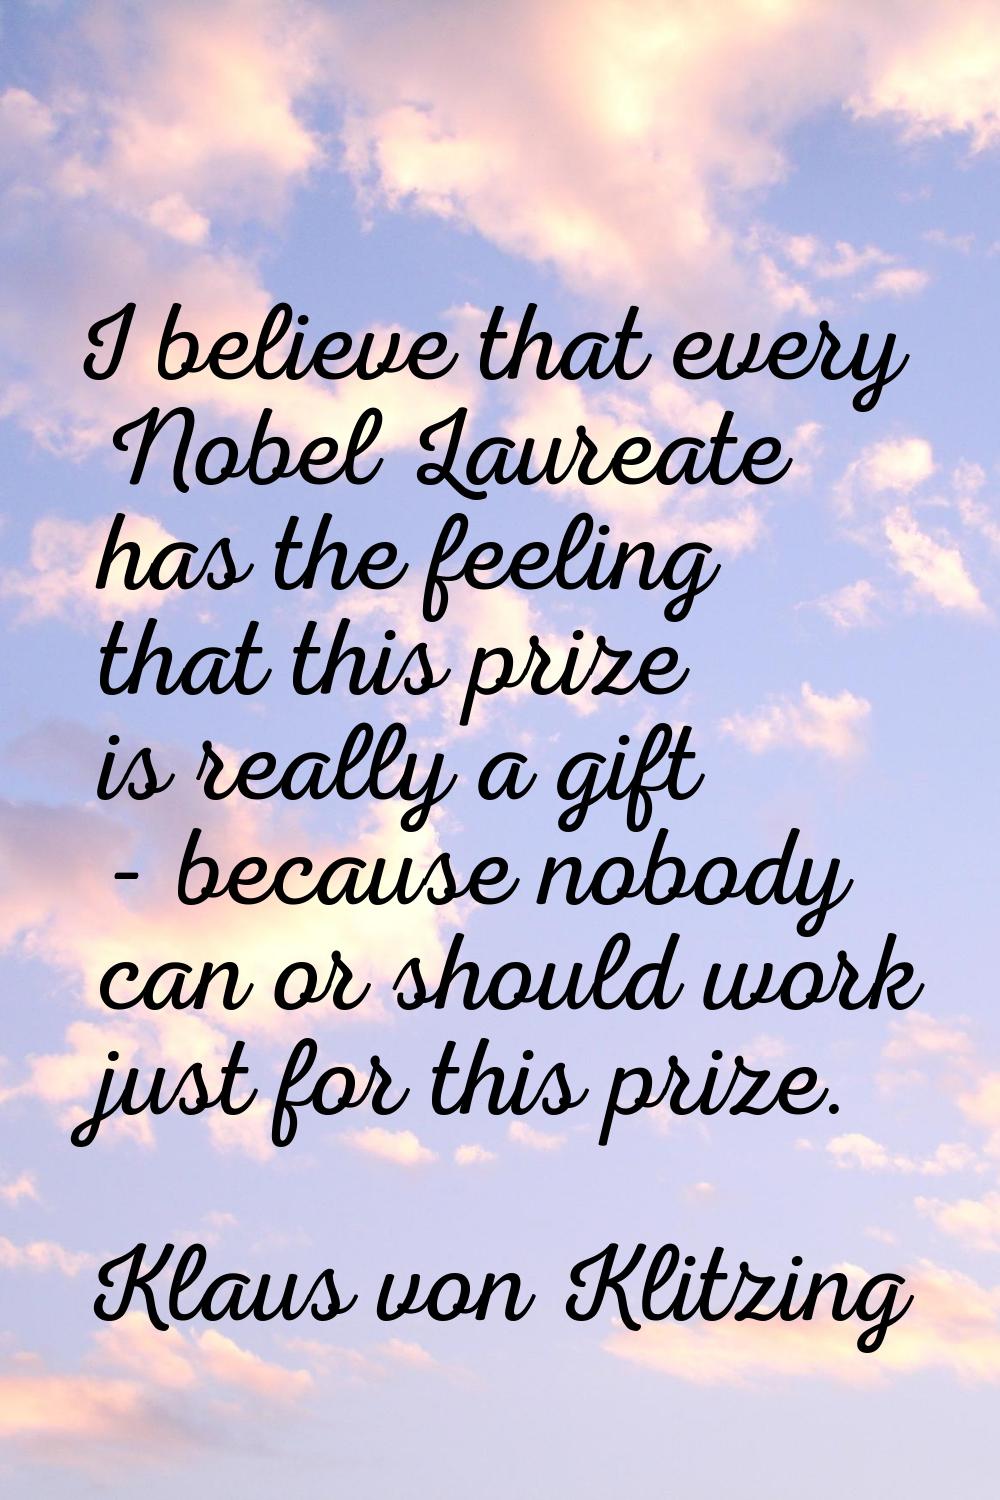 I believe that every Nobel Laureate has the feeling that this prize is really a gift - because nobo